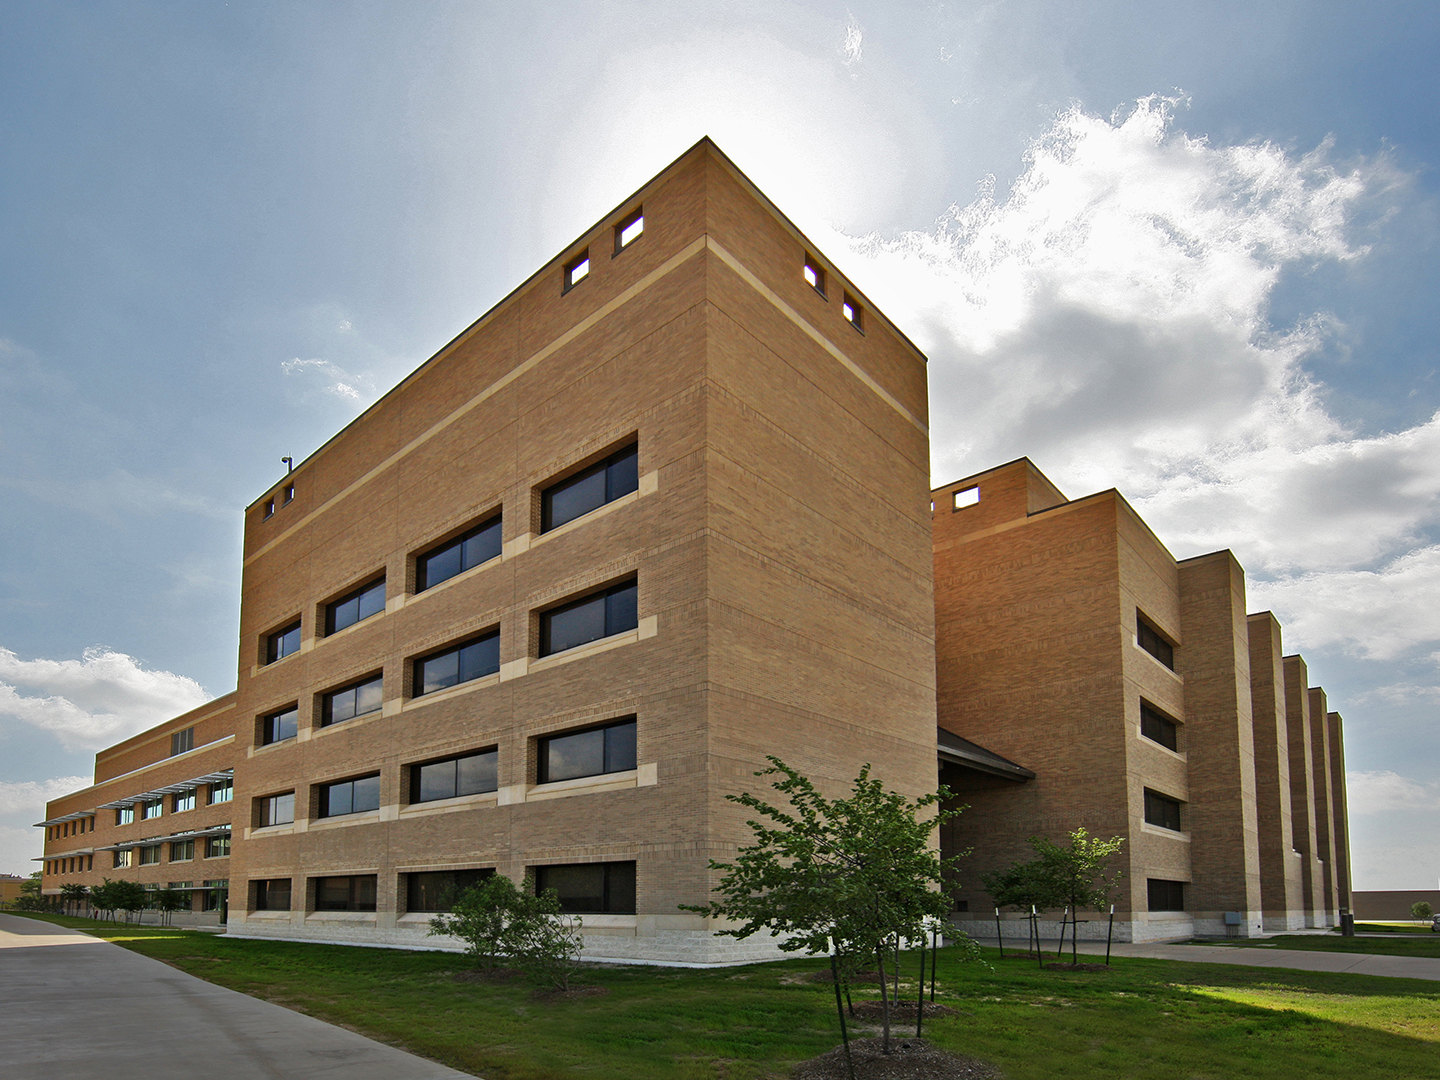 The Texas A&M Veterinary Research Building